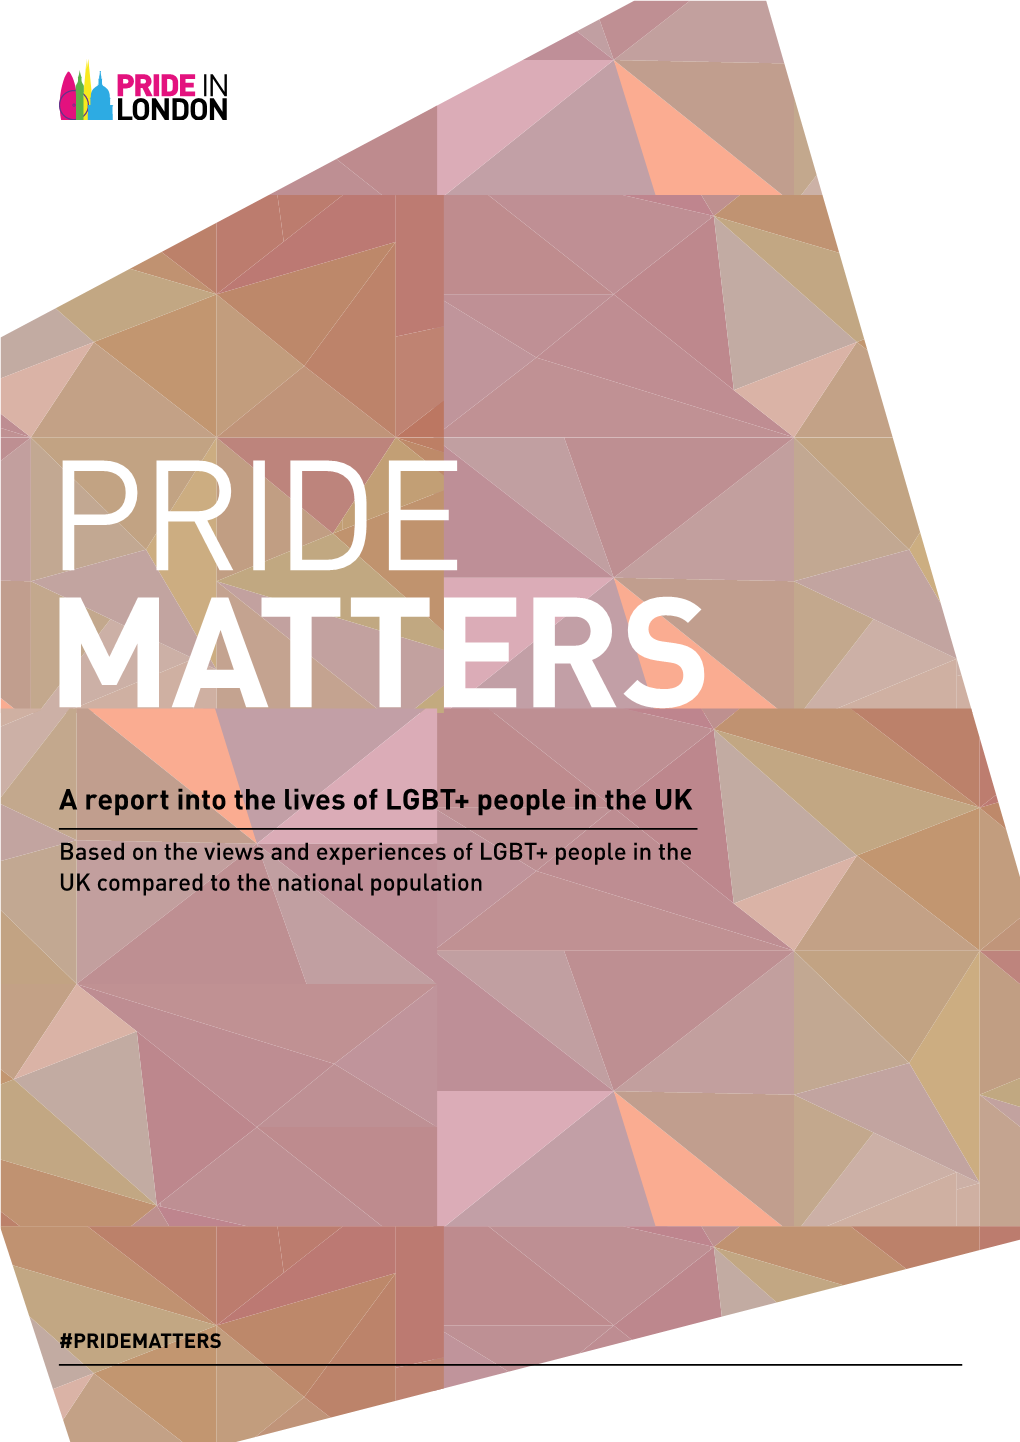 Pride Matters – a Report Into the Lives of LGBT+ People in the UK